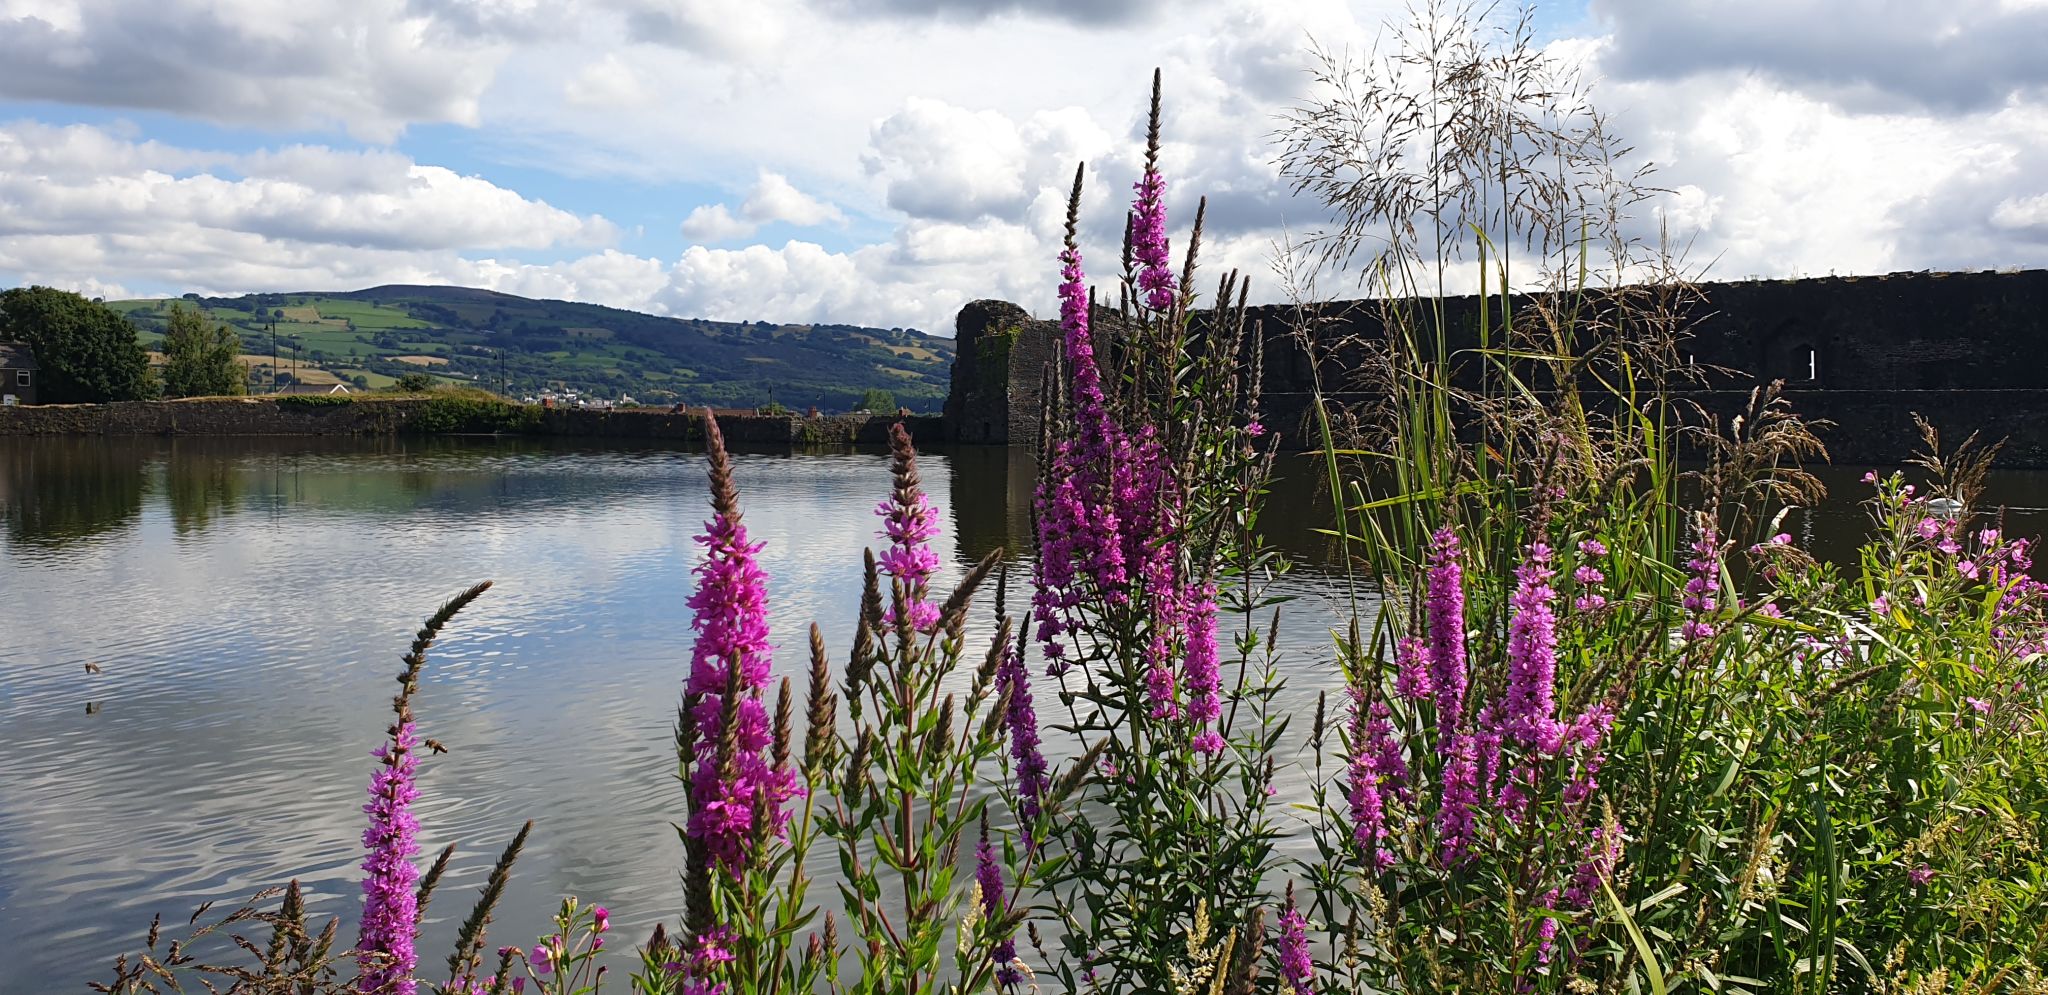 Improved-habitat-around-Caerphilly-Castle-moat-with-Salix-grown-wetland-plants-with the-hills-in-the-background